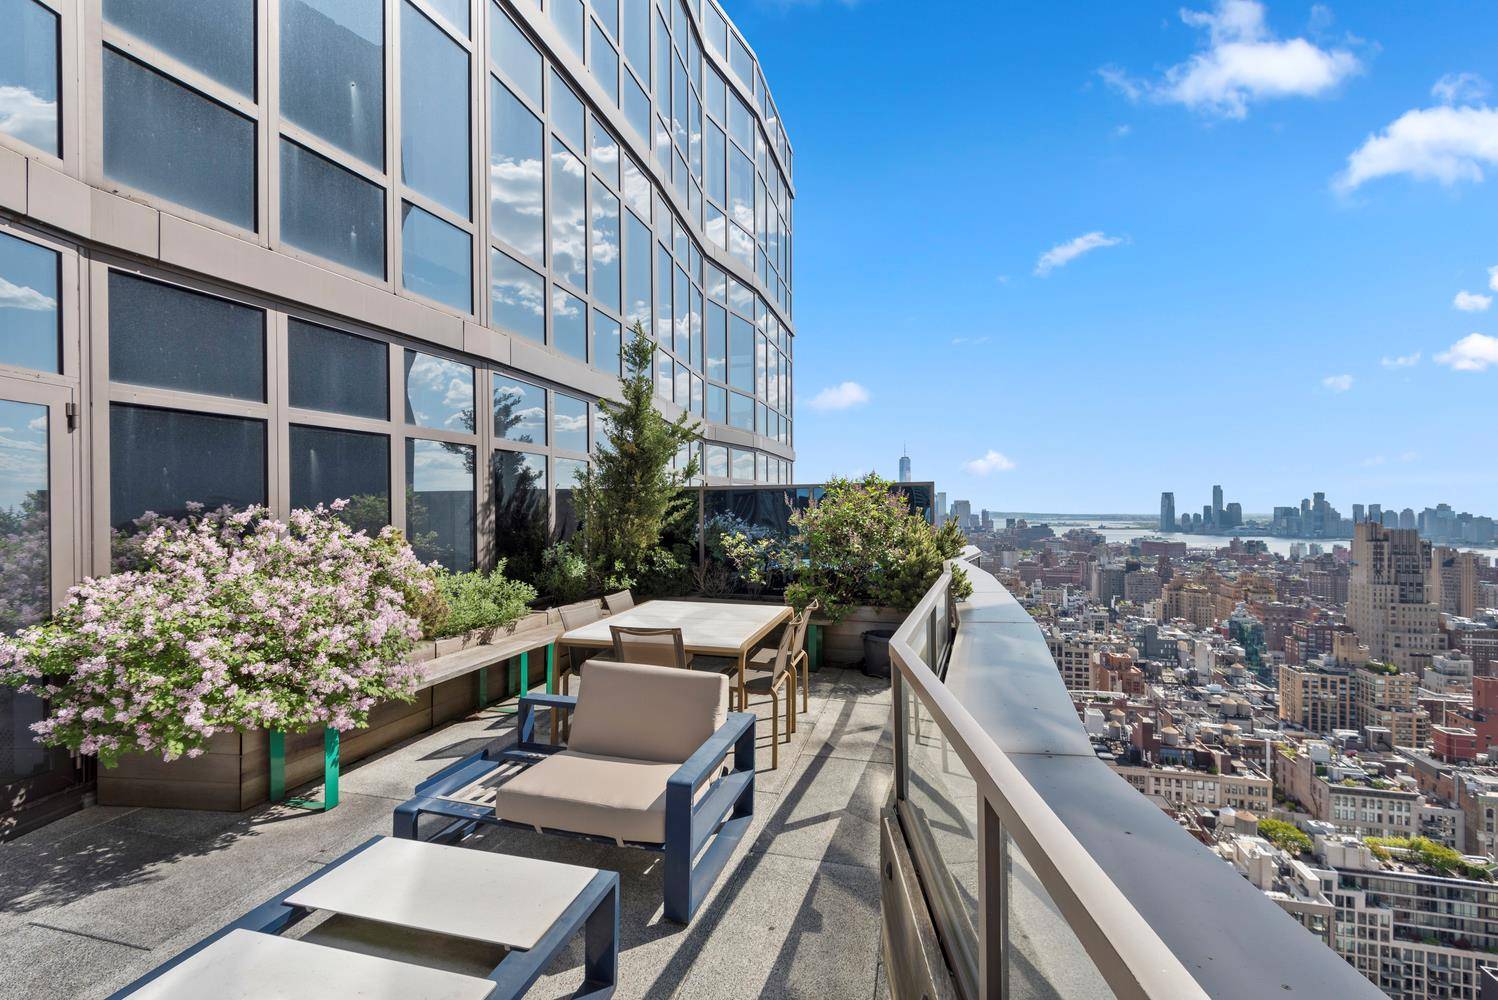 Entering this penthouse home you are immediately struck by the soaring 11 foot ceilings and jaw dropping views of Midtown and Hudson River through the floor to ceiling wall to ...